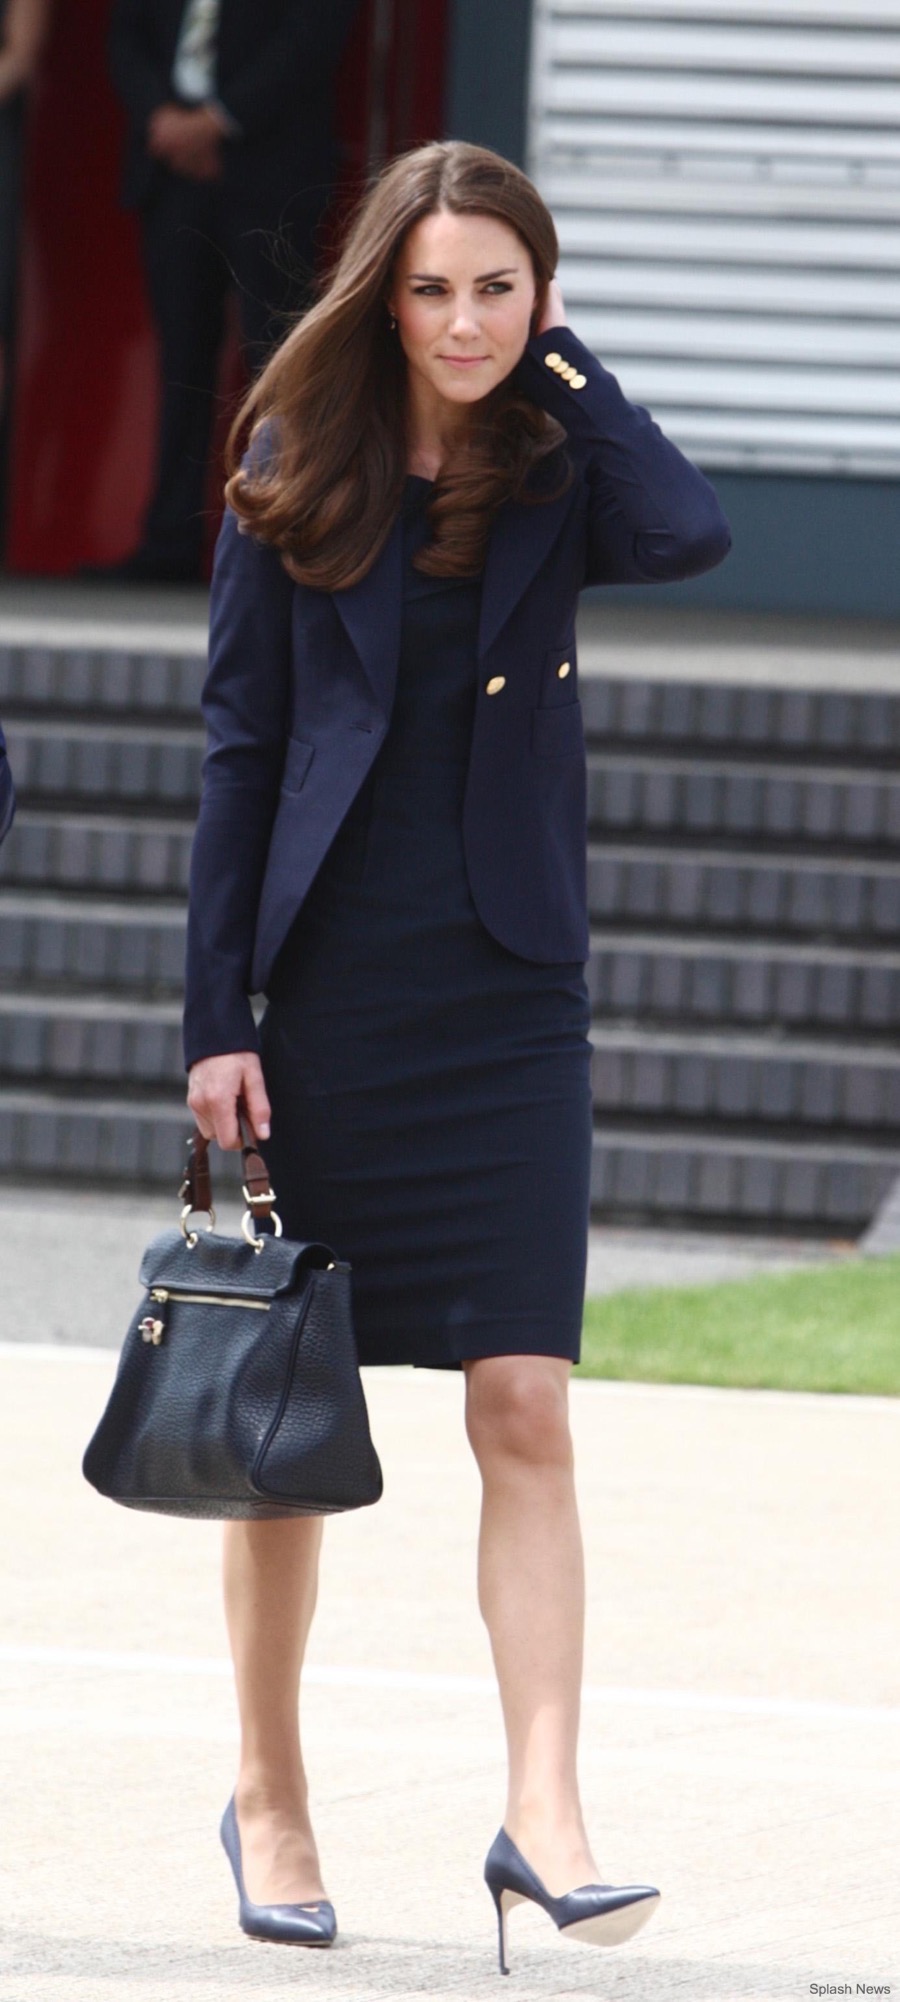 Kate Middleton at Heathrow Airport ahead of the Canada 2011 tour